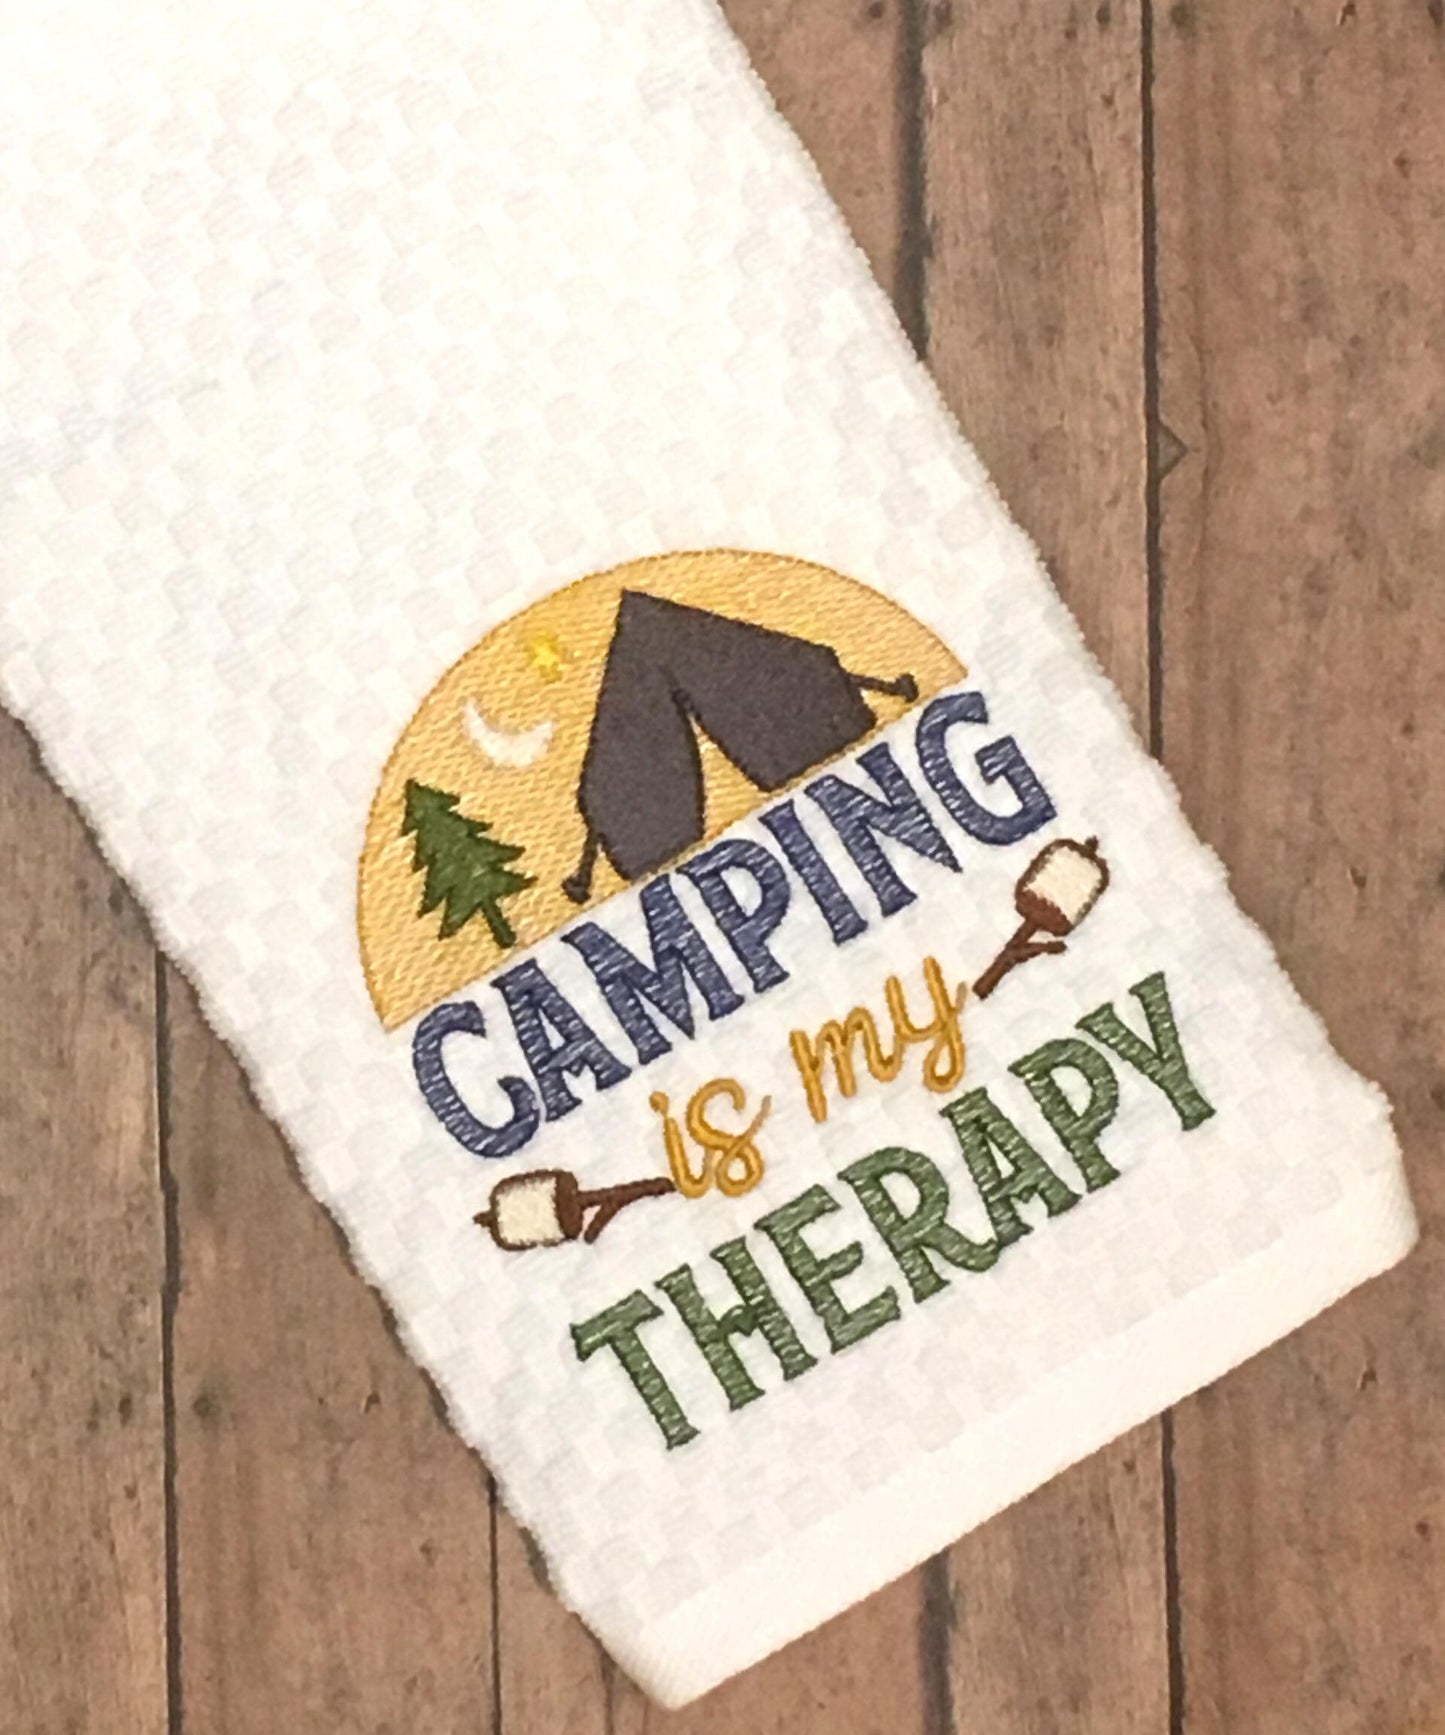 Camping is my therapy - 3 sizes- Digital Embroidery Design